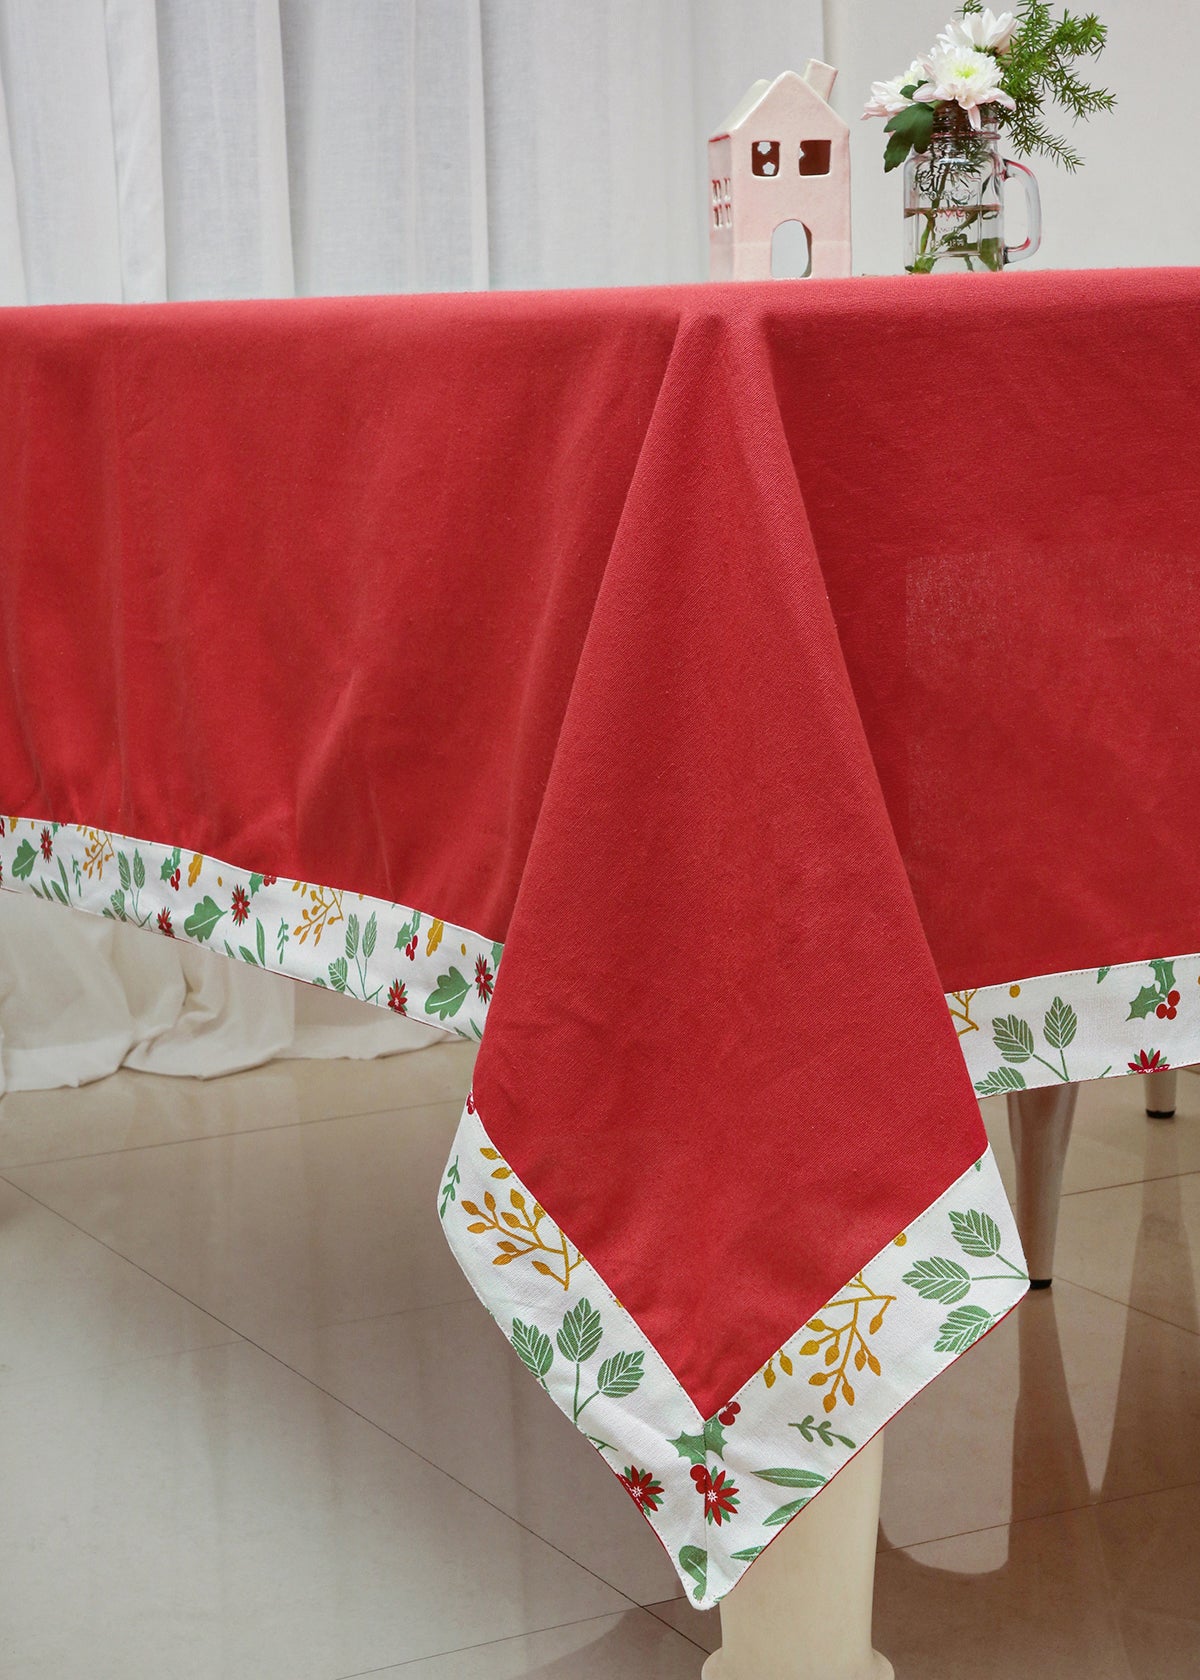 Cherry Red Table Cloth